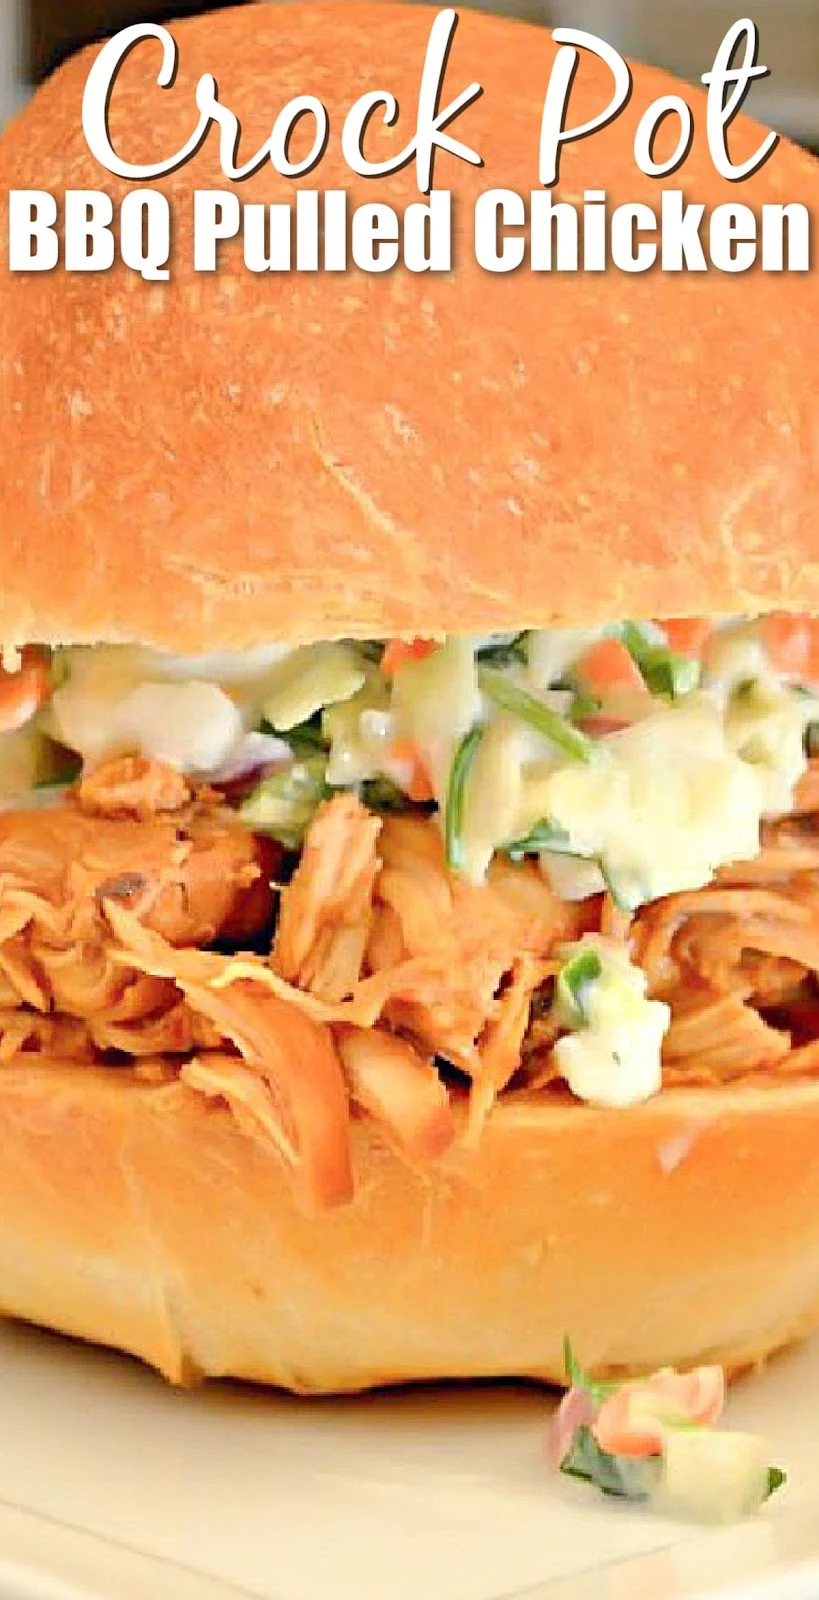 A side shot of a Crock Pot Pulled Chicken Sandwich with Homemade BBQ Sauce and white text at the top of the photo Crock Pot BBQ Pulled Chicken.